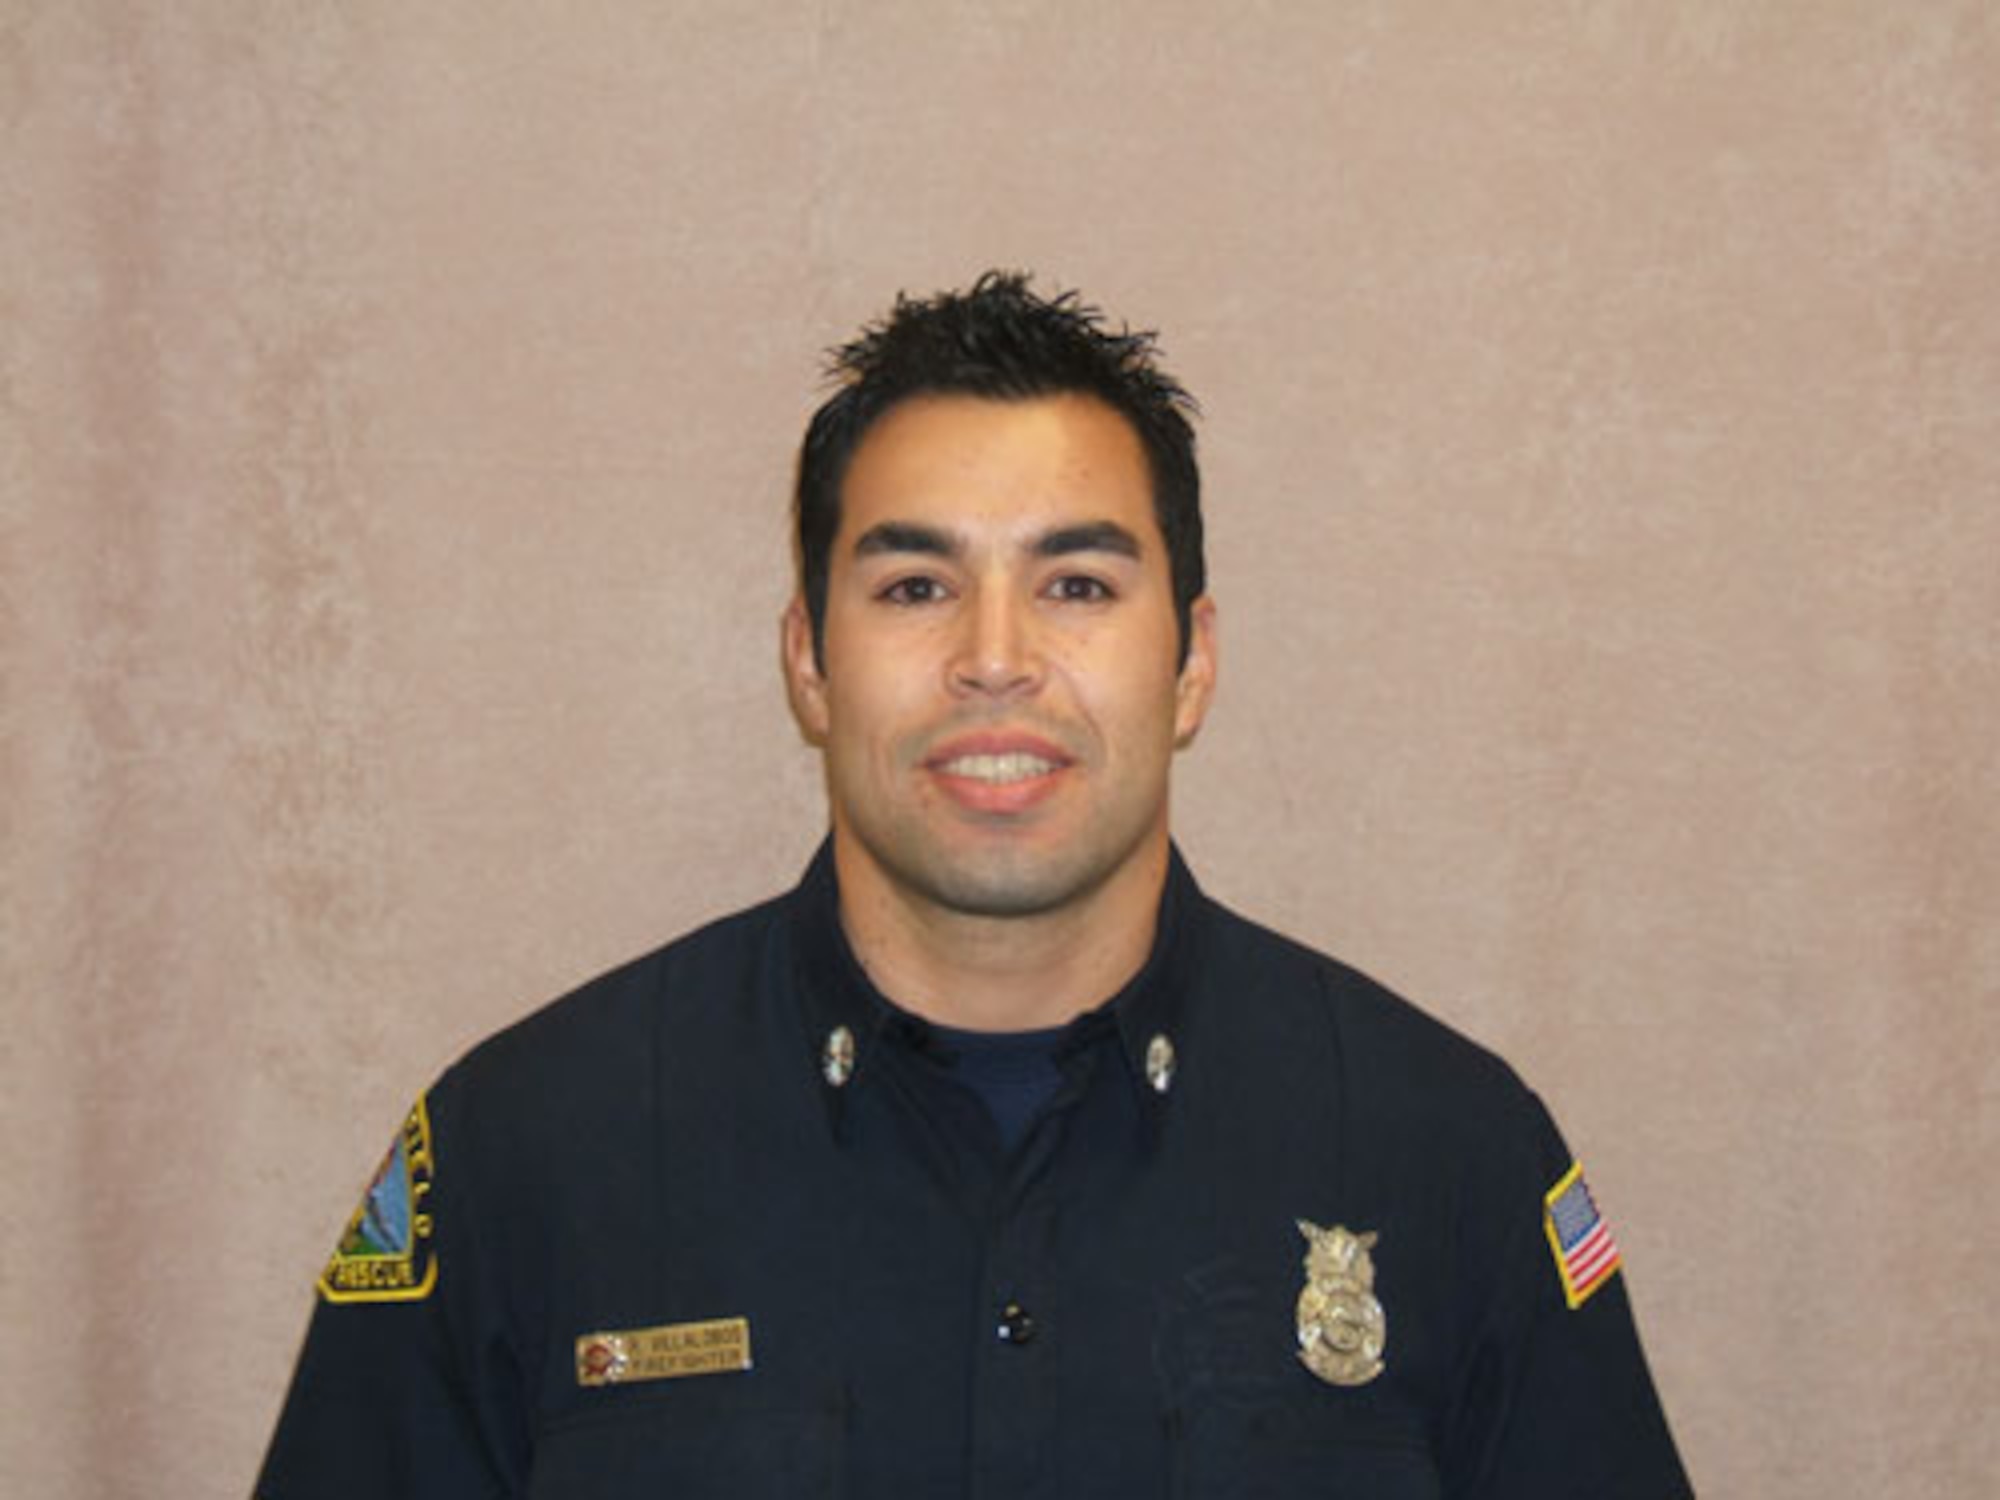 Air Force Reserve Staff Sgt. Ricardo Villalobos, 28, was a native of Escondido, Calif., and had been a rescue man with March Air Reserve Base’s 452nd Fire Emergency Services for four years. Sergeant Villalobos was killed Saturday morning in an off-base motorcycle accident. (Photo courtesy of Assistant Fire Chief Cooper M. Eliot, 452nd Fire Emergency Services) 